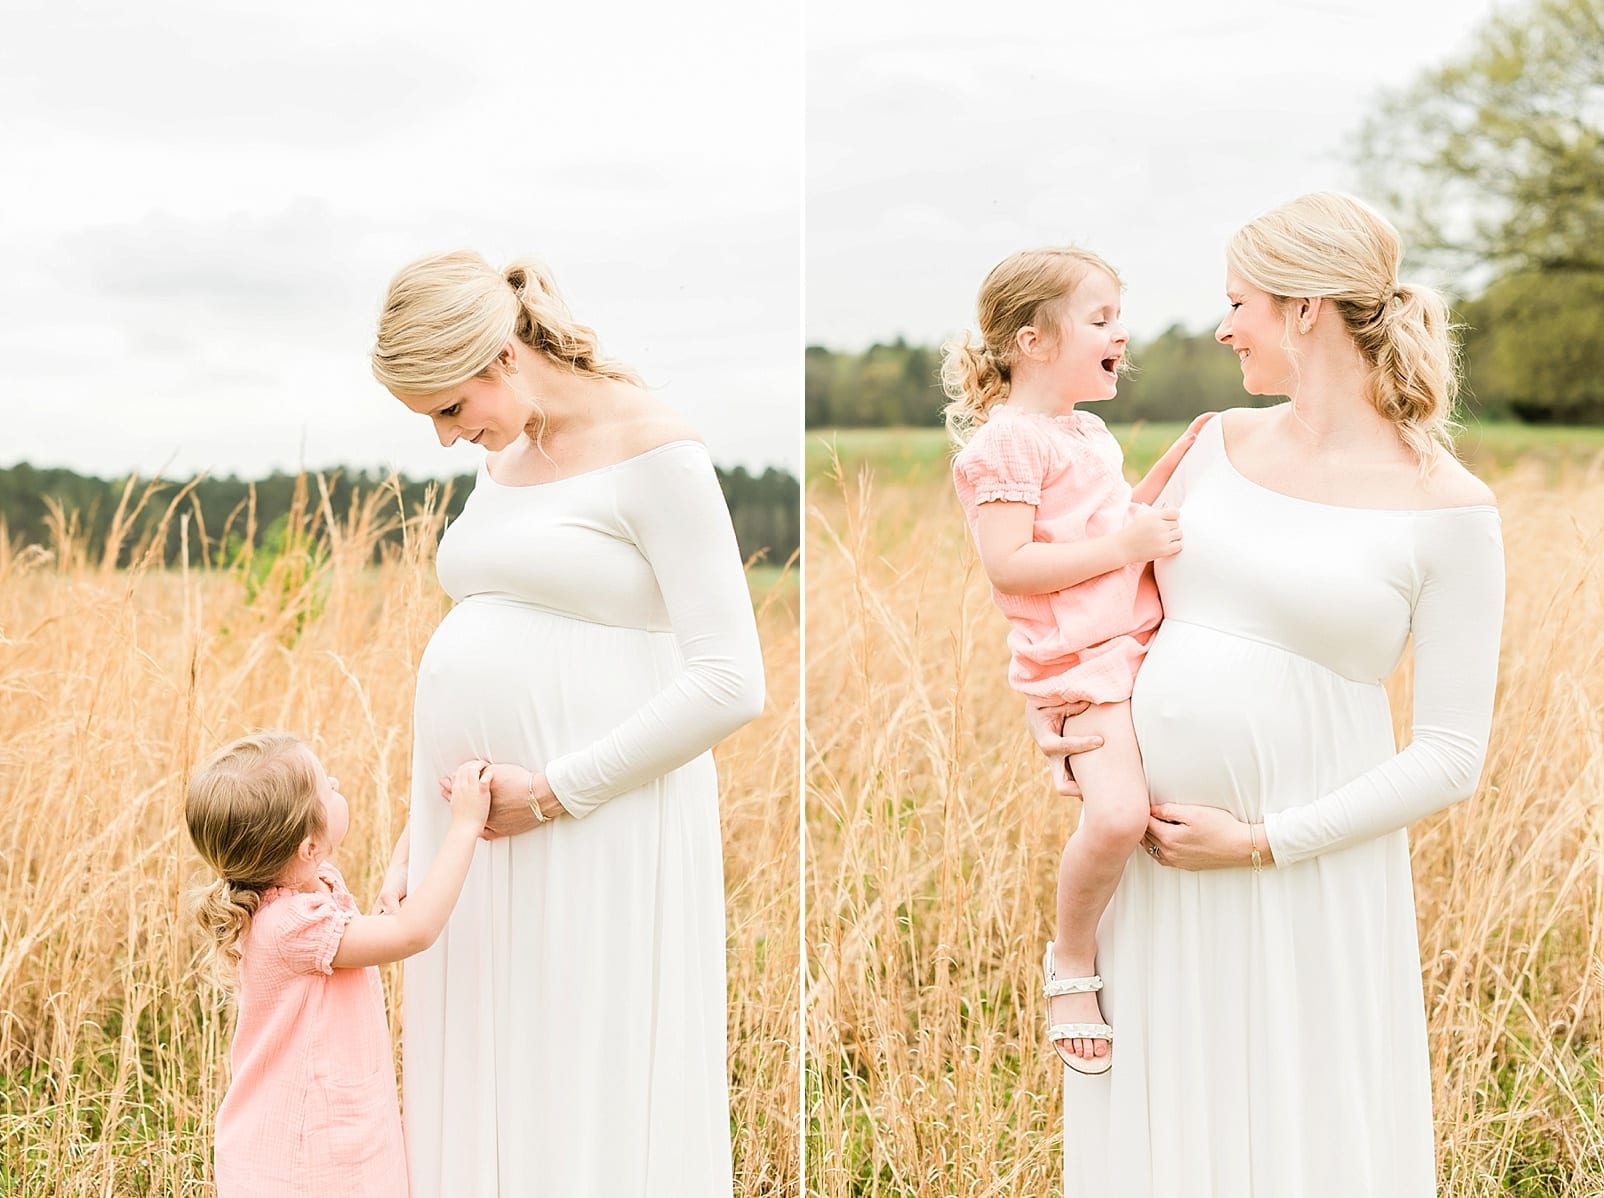 Wake Forest mother holding her four year old daughter during the maternity session in a wheat field photo